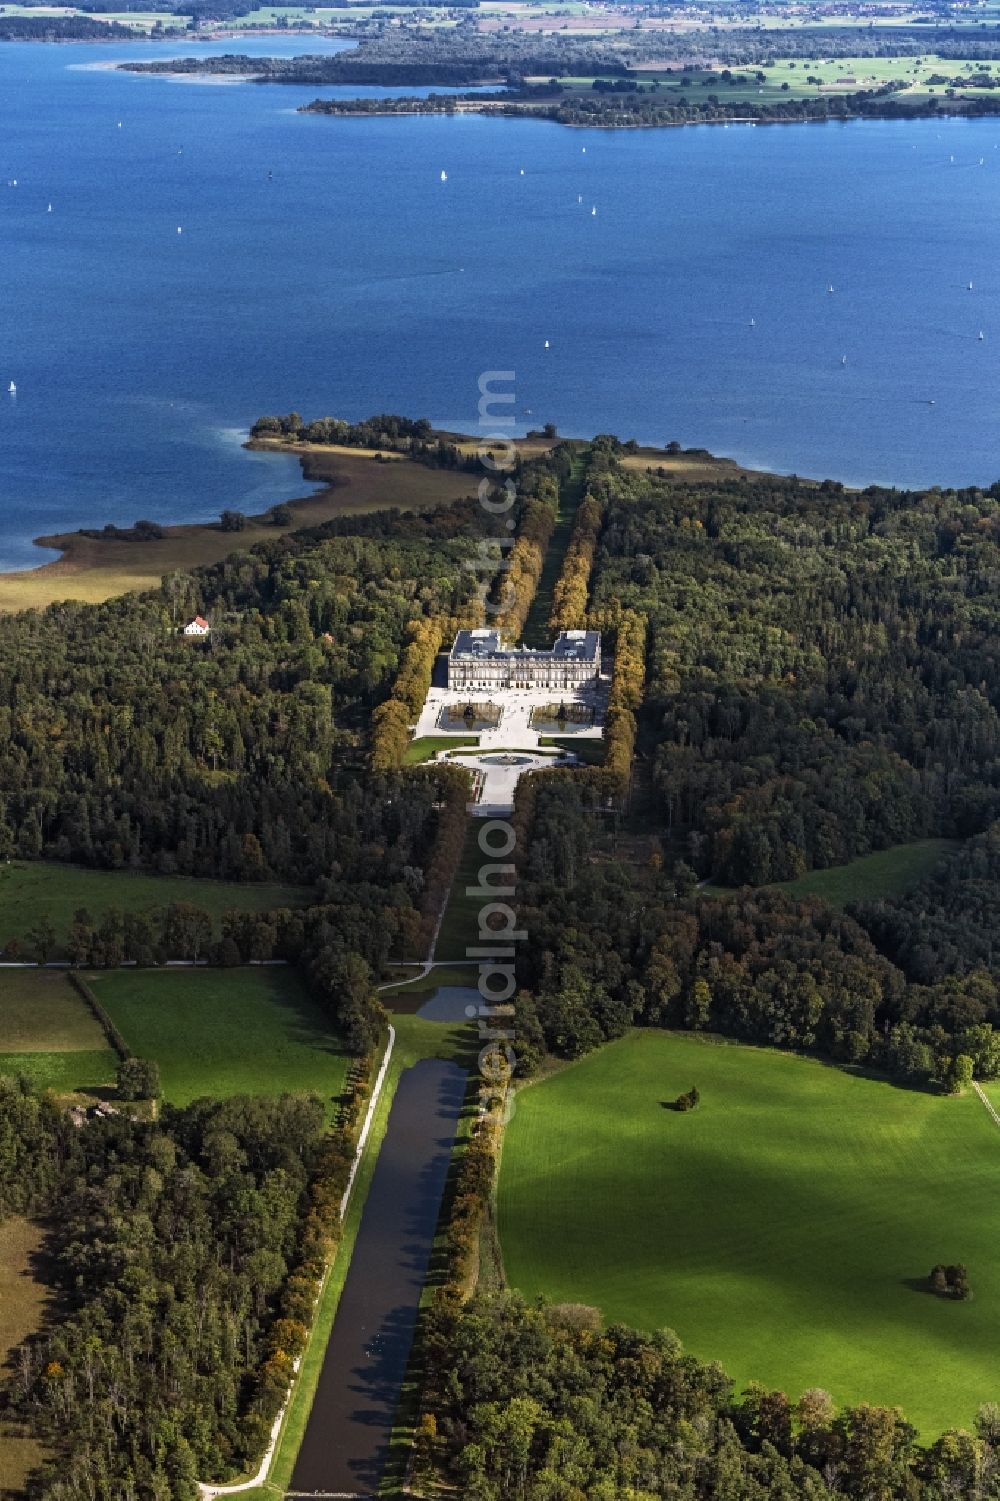 Chiemsee from the bird's eye view: Building complex in the park of the castle Herrenchiemsee in Chiemsee in the state Bavaria